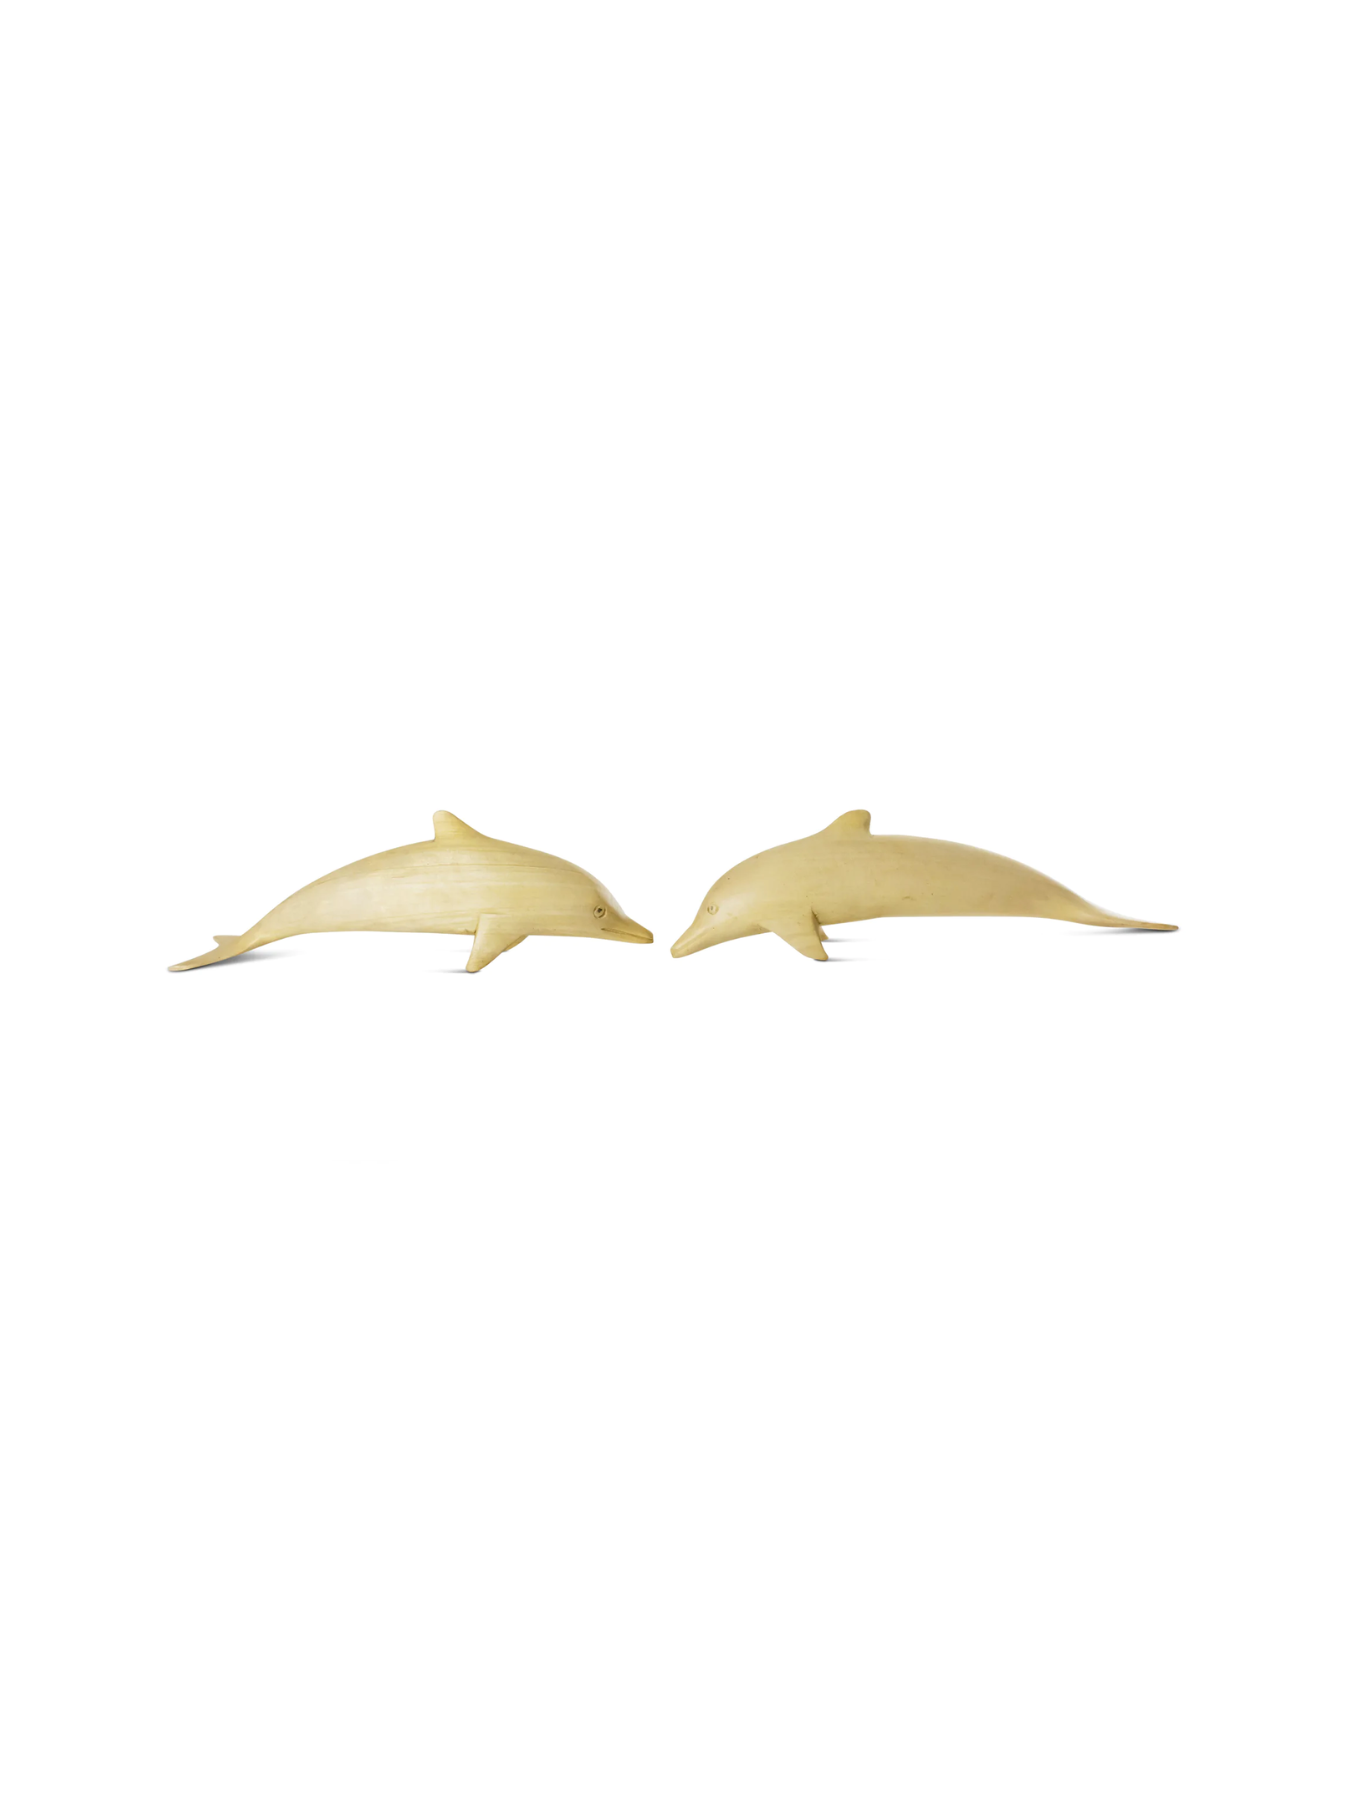 Wooden Hand Carved Set of 2 Swimming Dolphins Statue Sculpture Wood Decor Fish Figurine Handcrafted Handmade Seaside Tropical Nautical Ocean Coastal